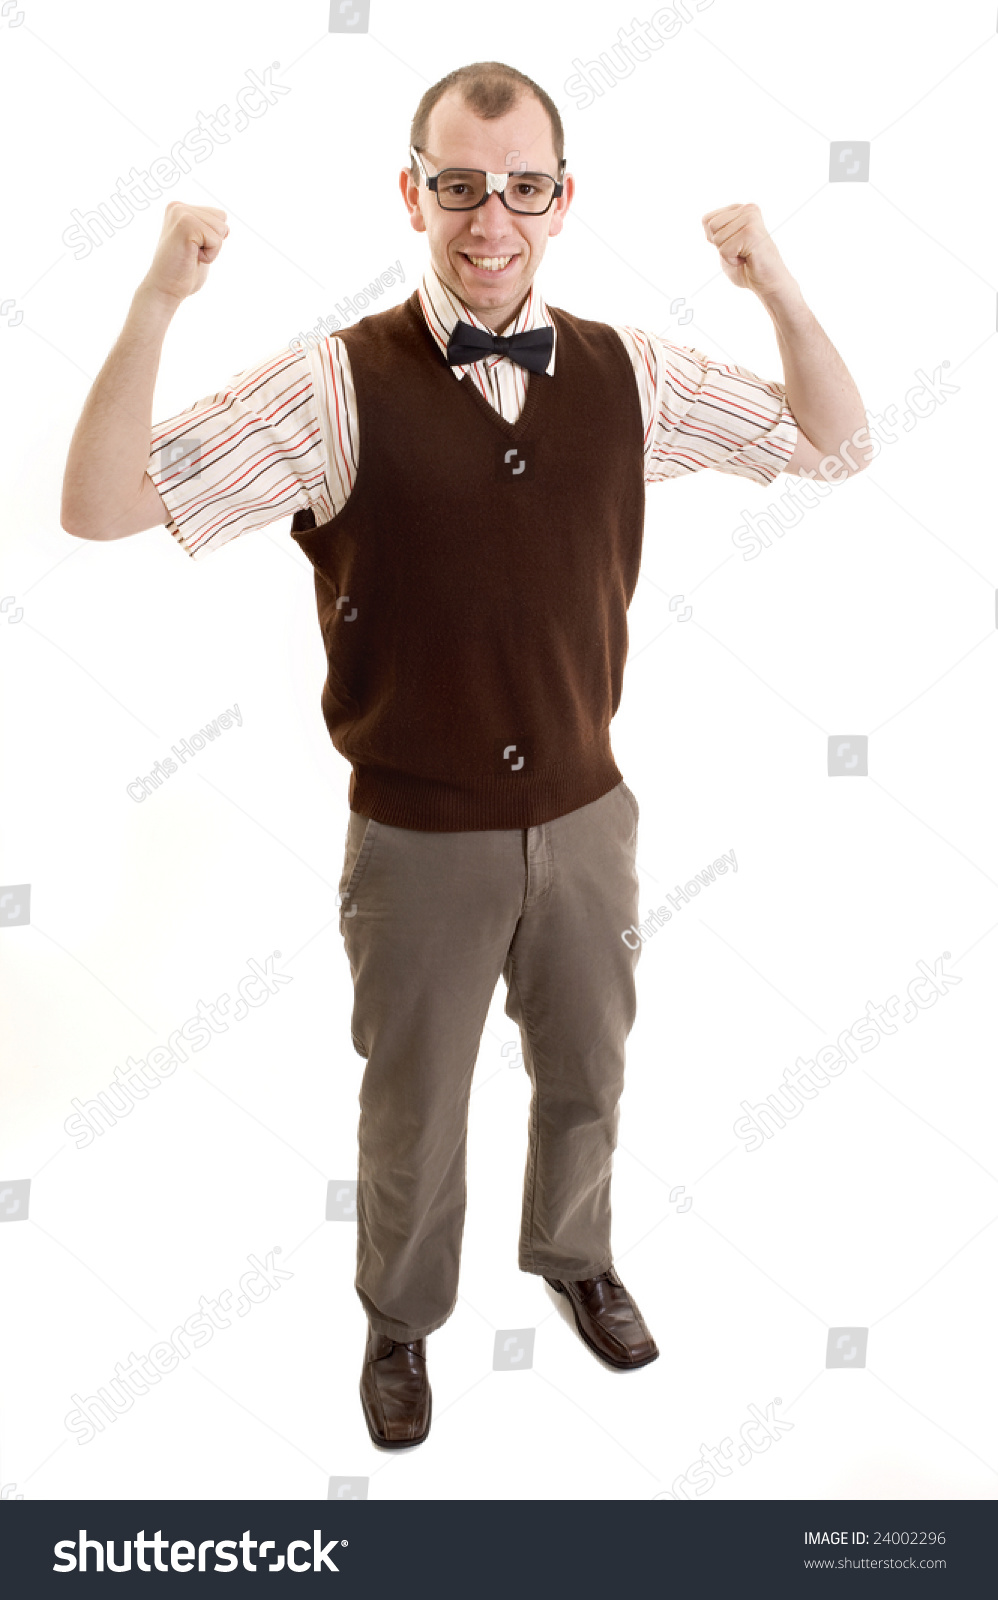 Nerdy Looking Guy Flexing His Muscles Stock Photo 24002296 Shutterstock